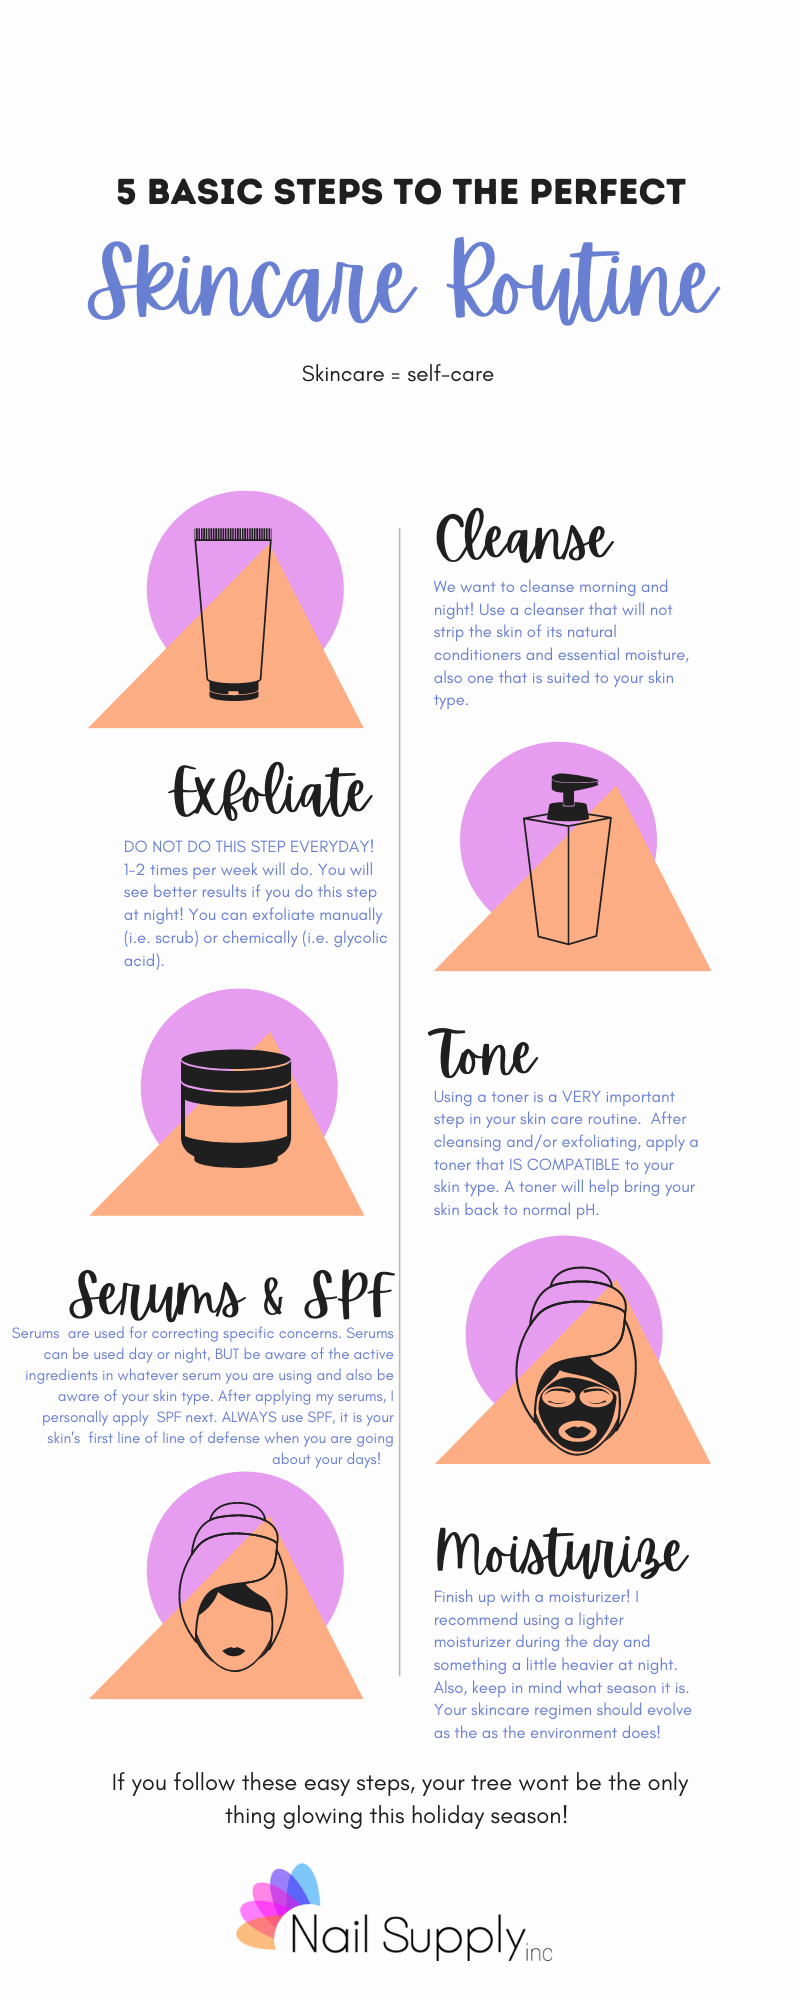 Let's About Skincare! - Supply Inc